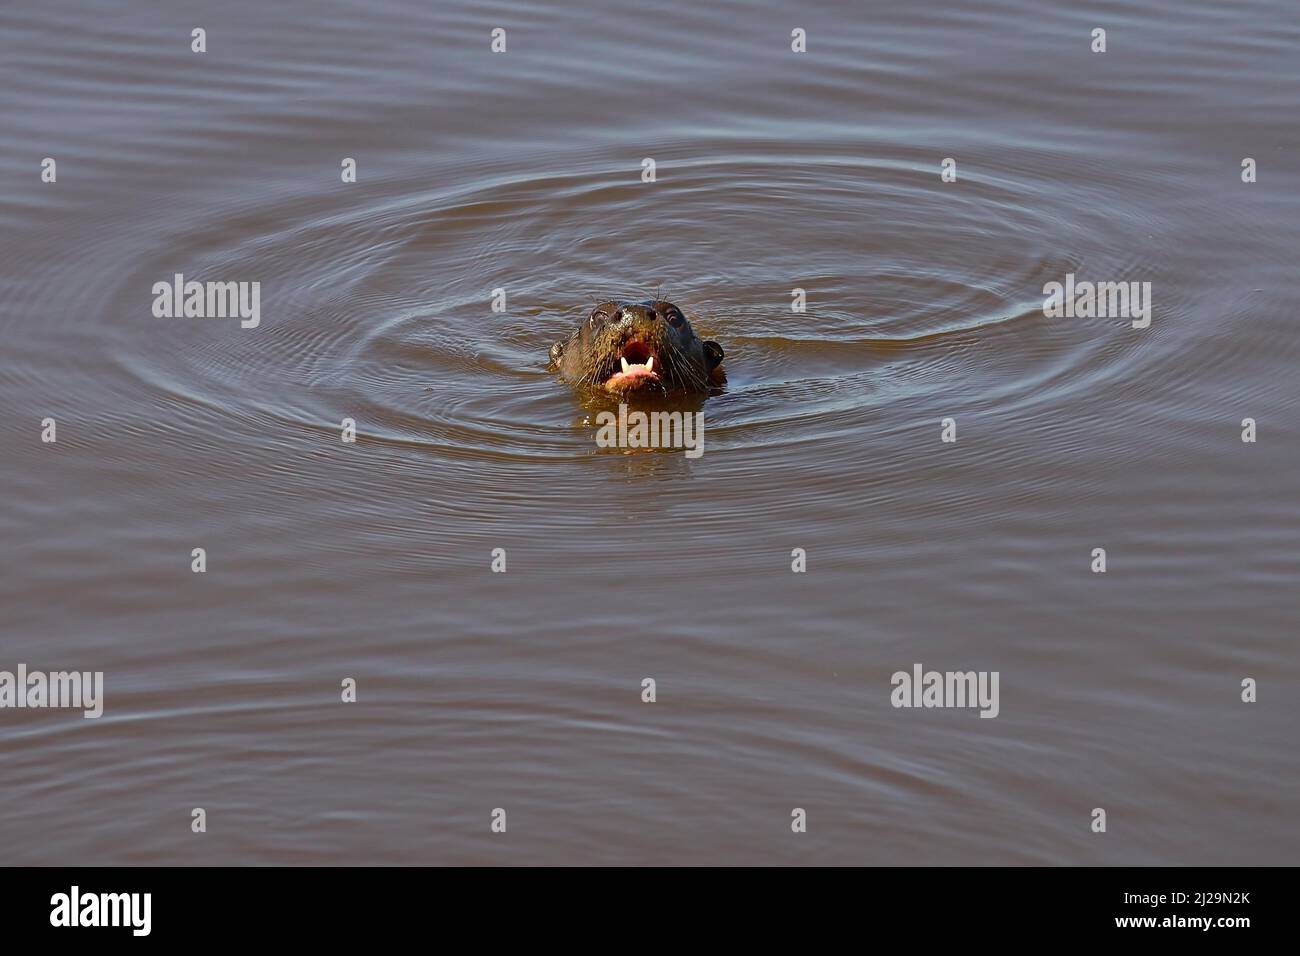 Giant otter (Pteronura brasiliensis) swimming with open mouth in murky water, Pantanal, Mato Grosso, Brazil Stock Photo